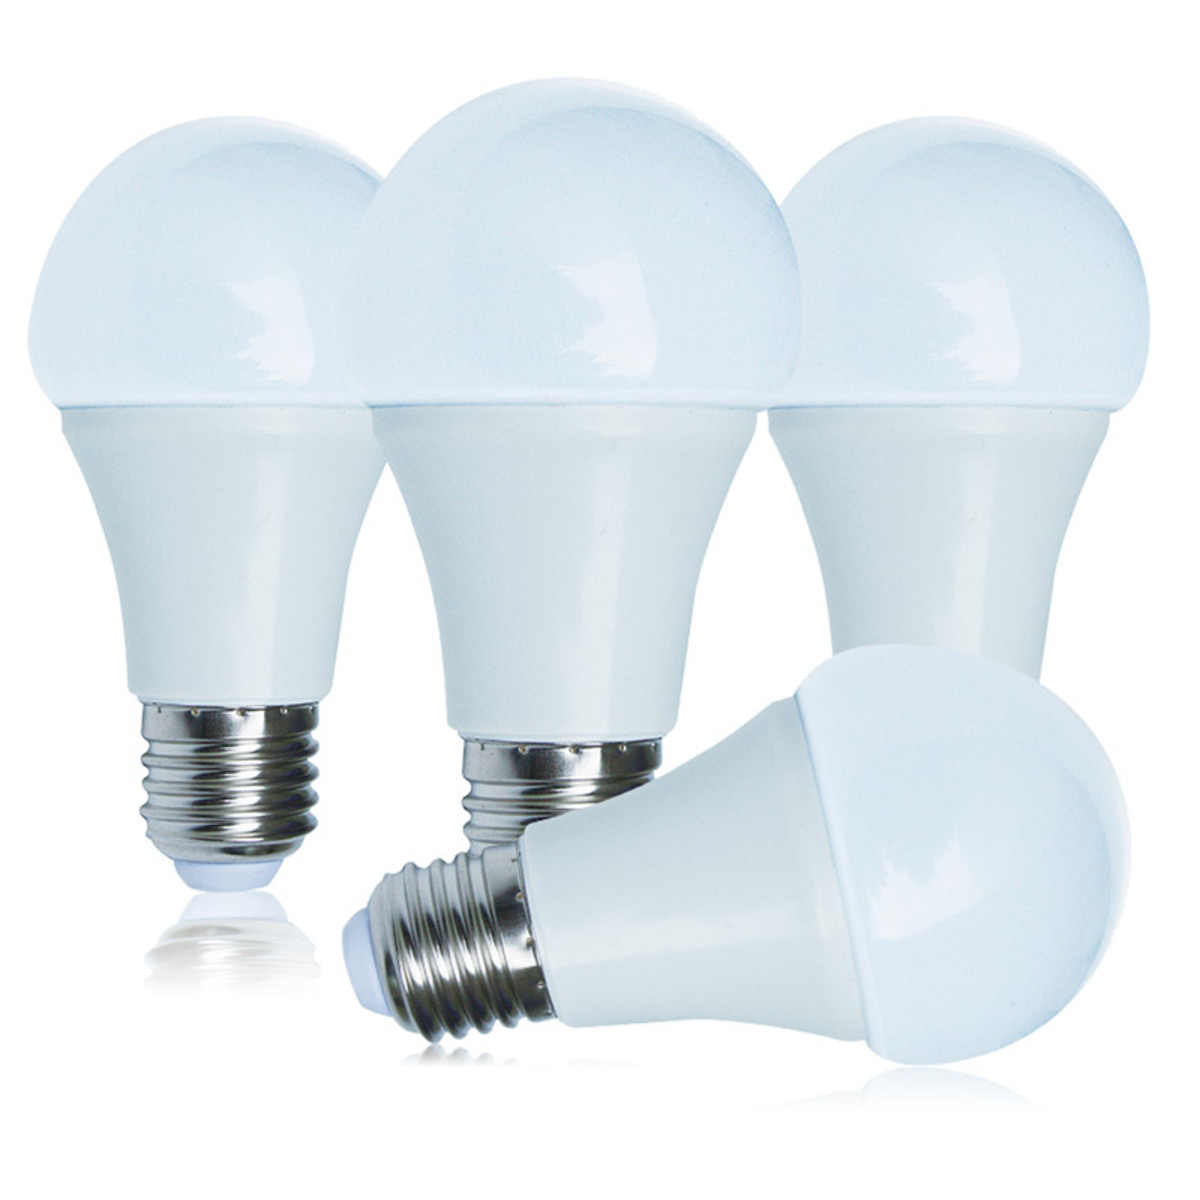 Conglom Luminus LED A60 Dimmable Bulbs - 4 Pack